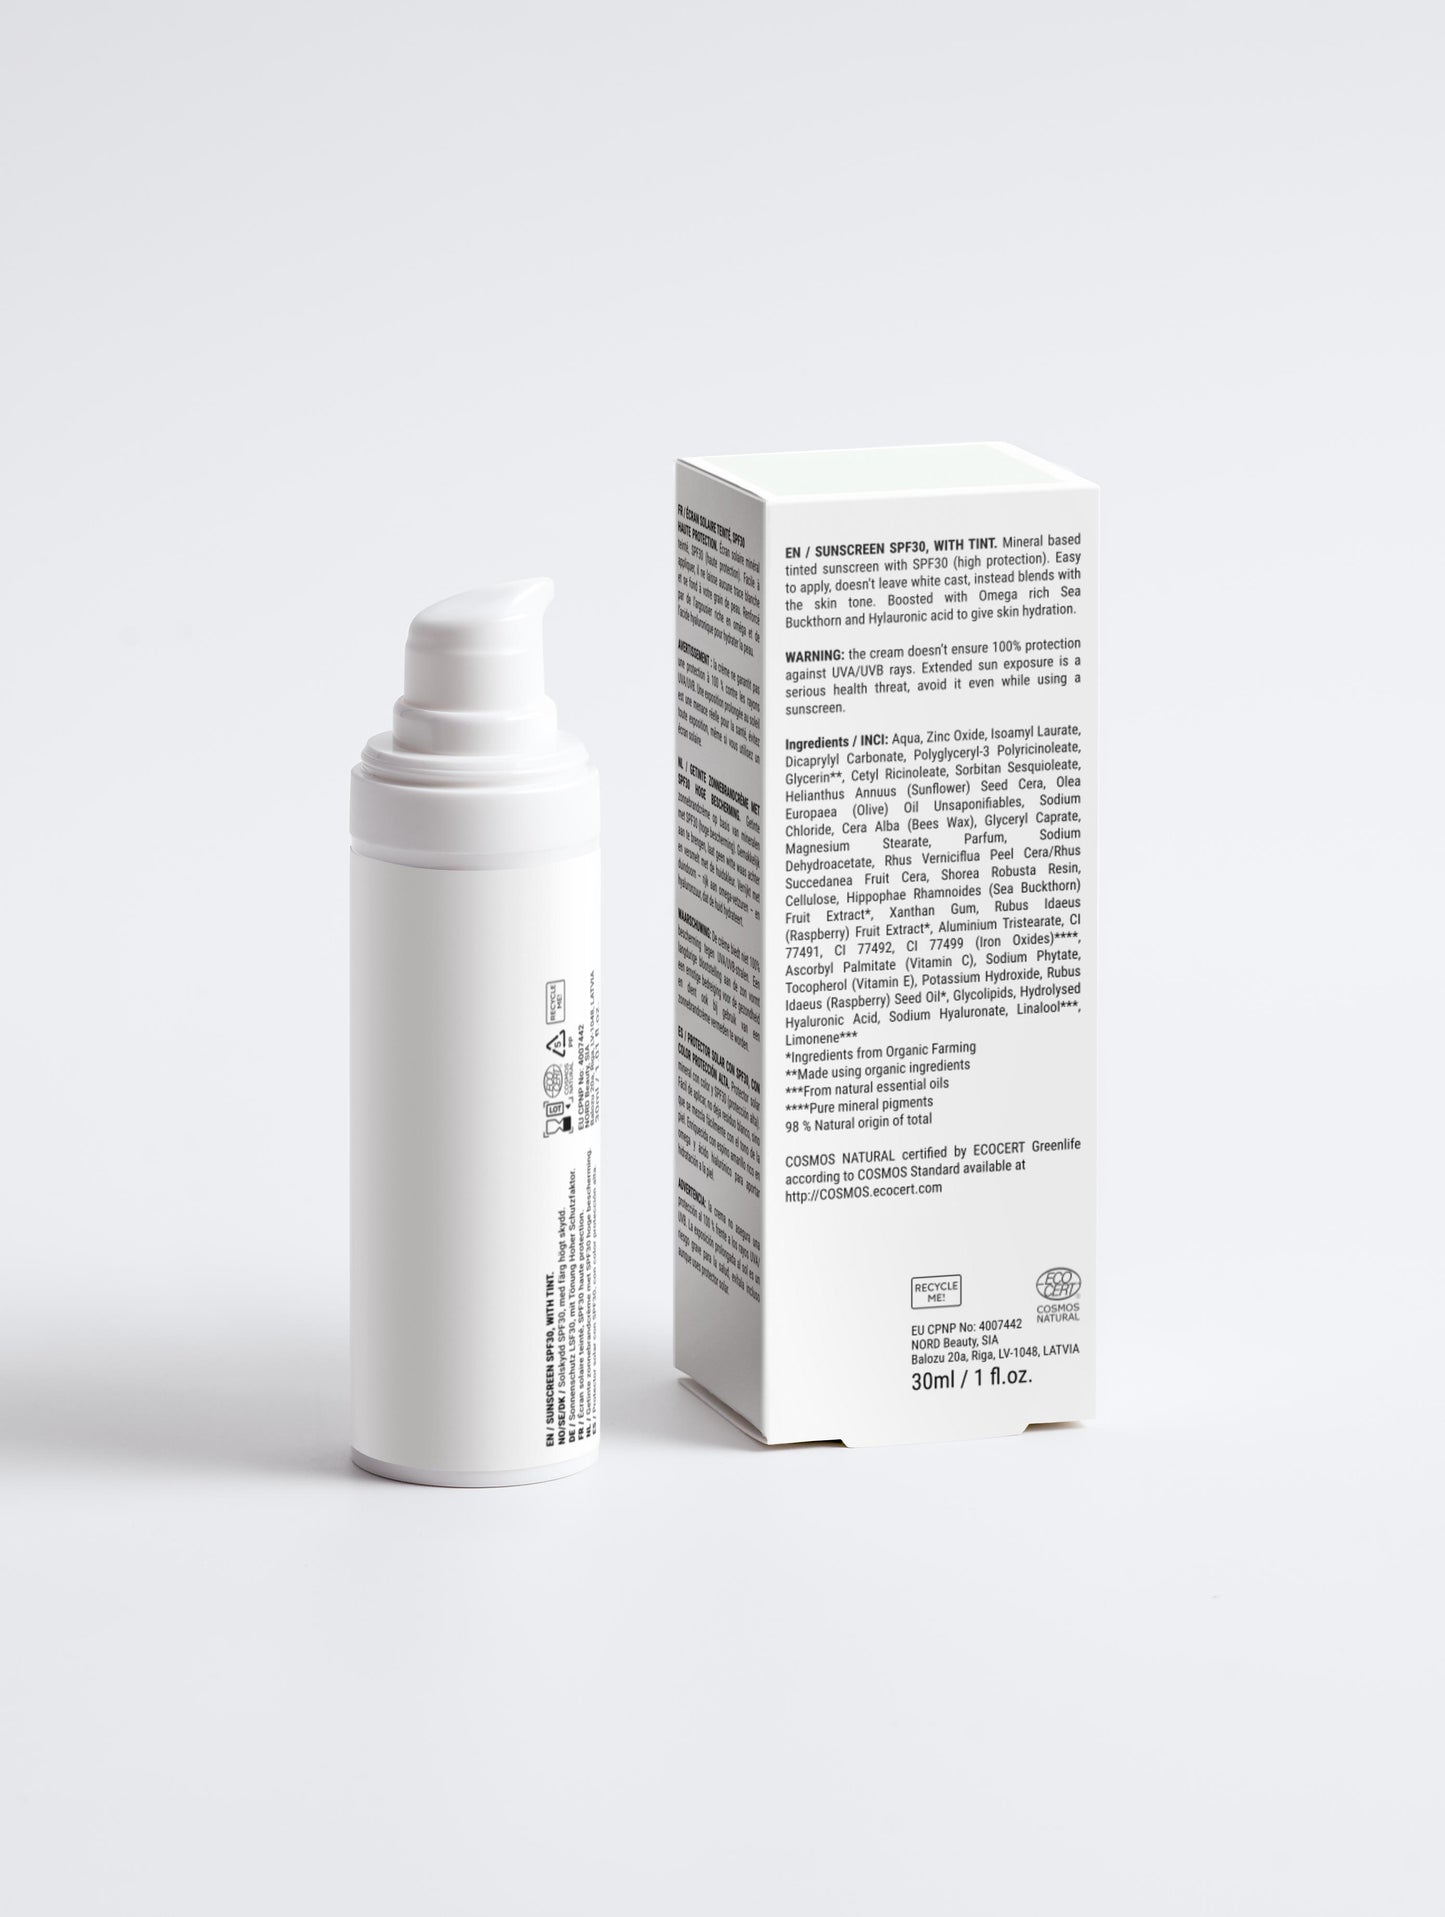 Lumitage sunscreen - the zinc-based organic sunscreen for daily facial use.